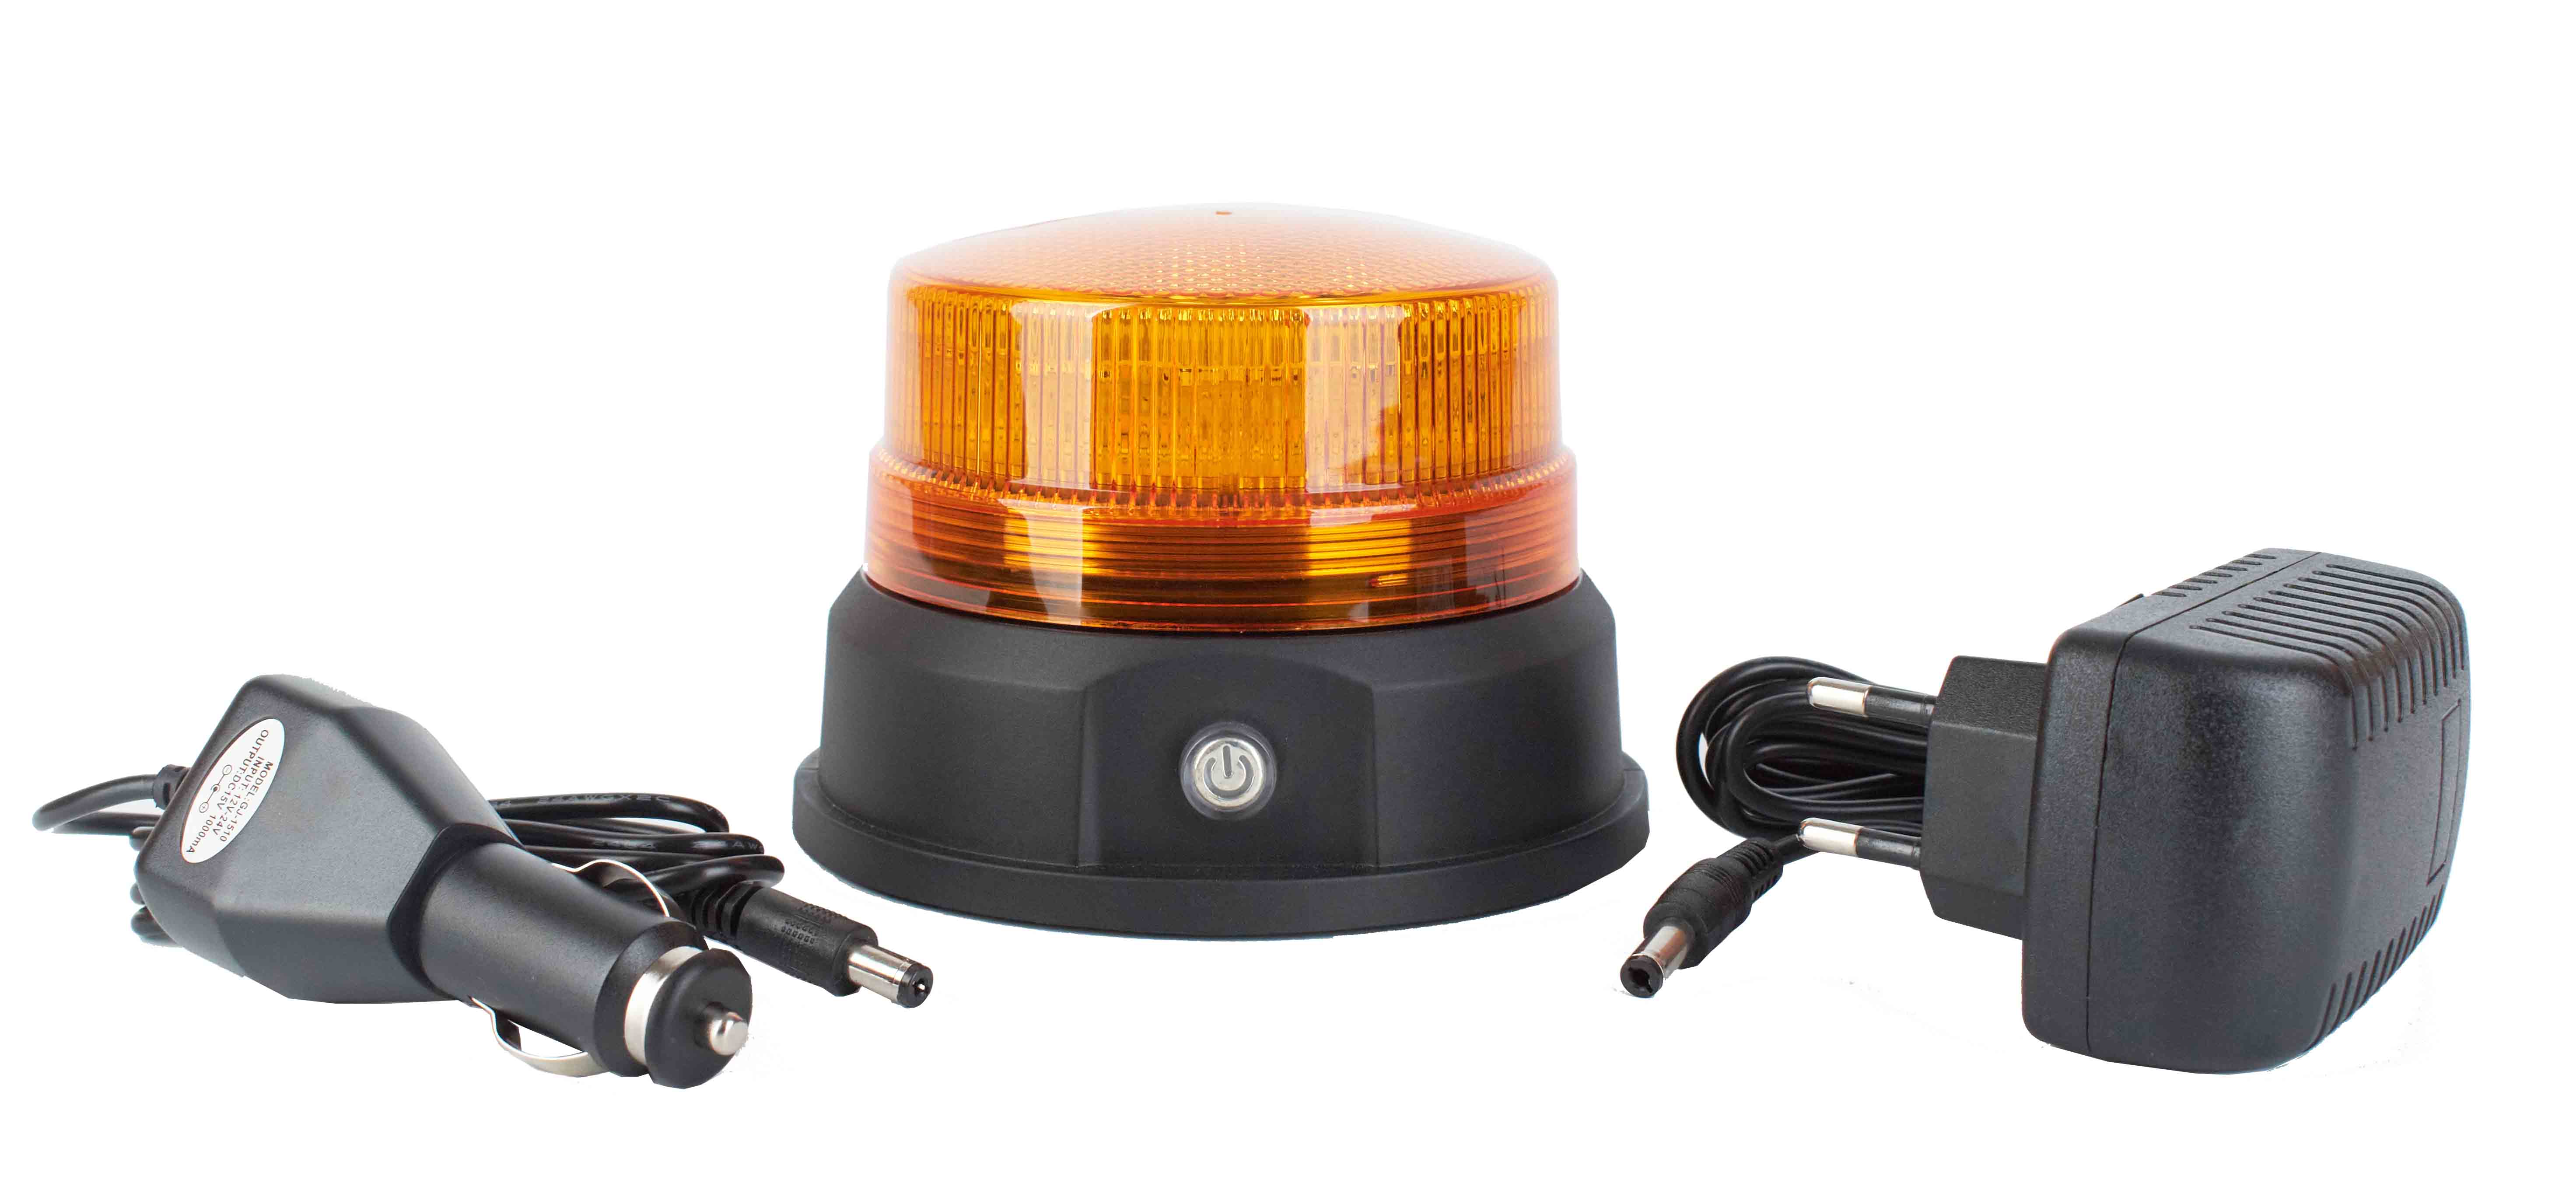 Agrieyes APP Control Mini Strobe Light Bar Rechargeable, Magnetic